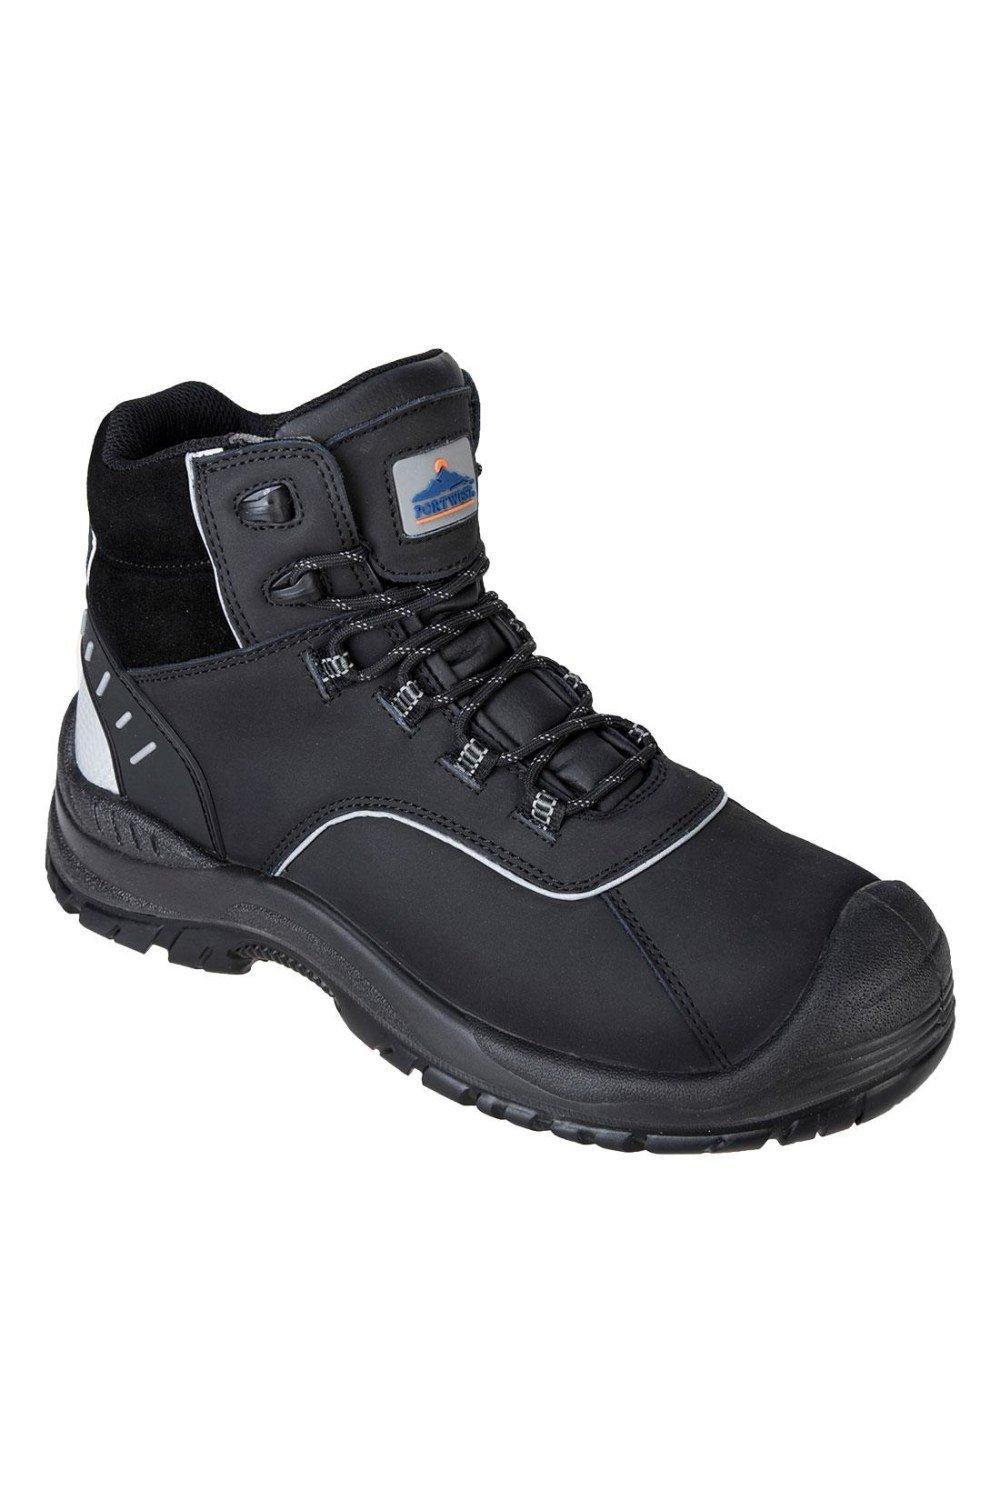 Avich Leather Compositelite Safety Boots